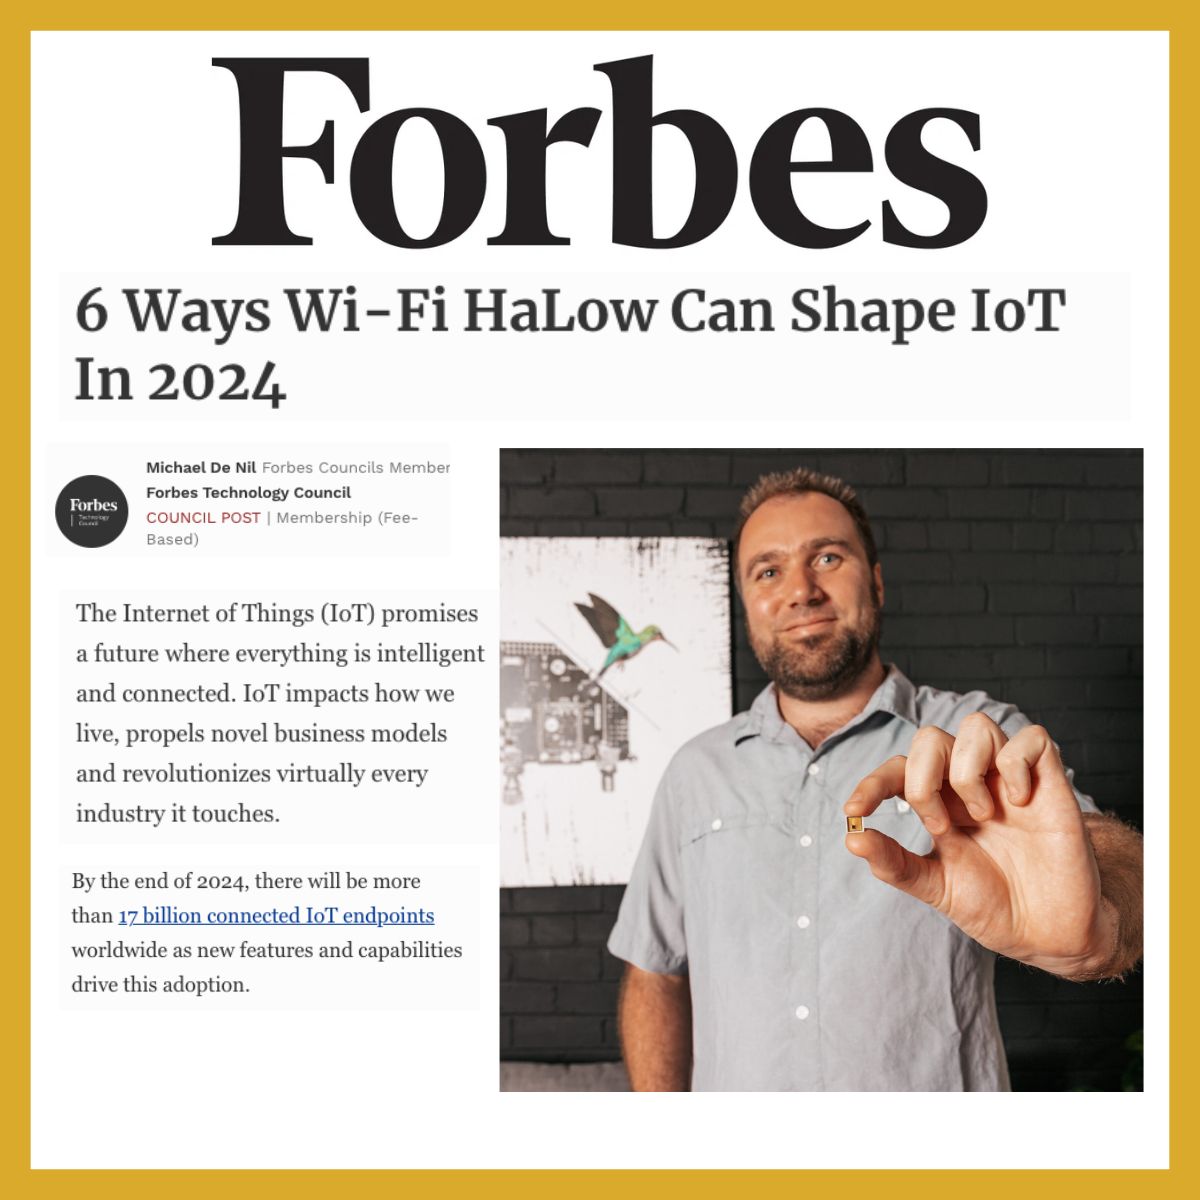 The Internet of Things (IoT) sector is only growing, bringing with it a hyper-connected & efficient future 🔮 In the below @Forbes article, @MichaelDeNil shares his insights into how their Wi-Fi HaLow tech is powering #IoT in 2024 & beyond. More 👇